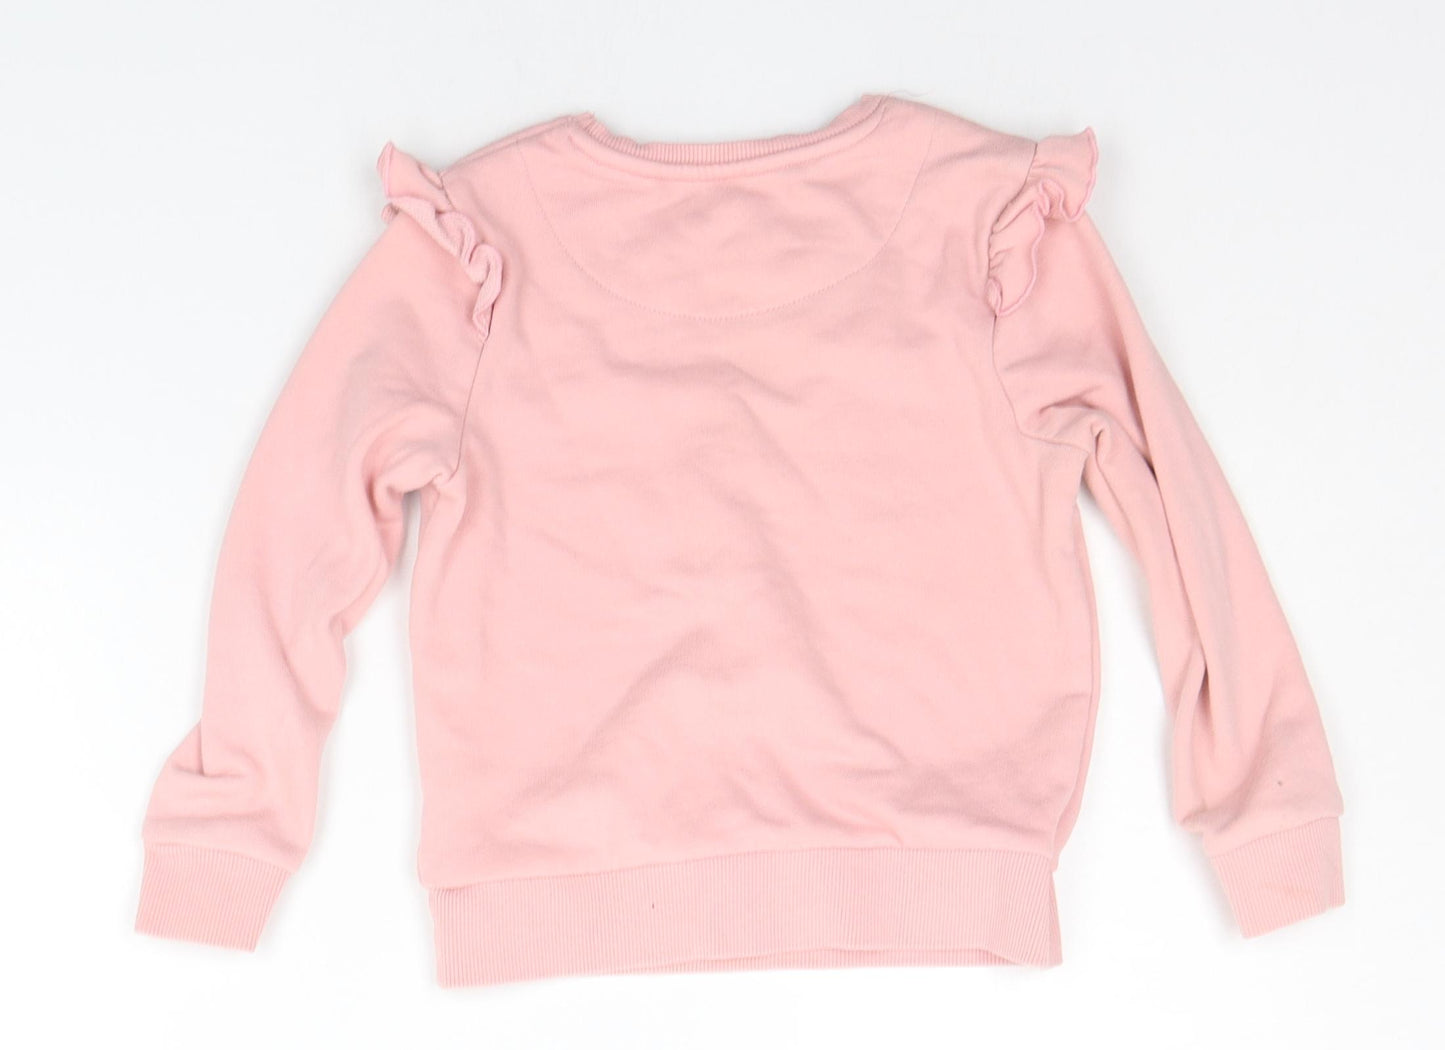 F&F Boys Pink   Pullover Jumper Size 4-5 Years  - going out